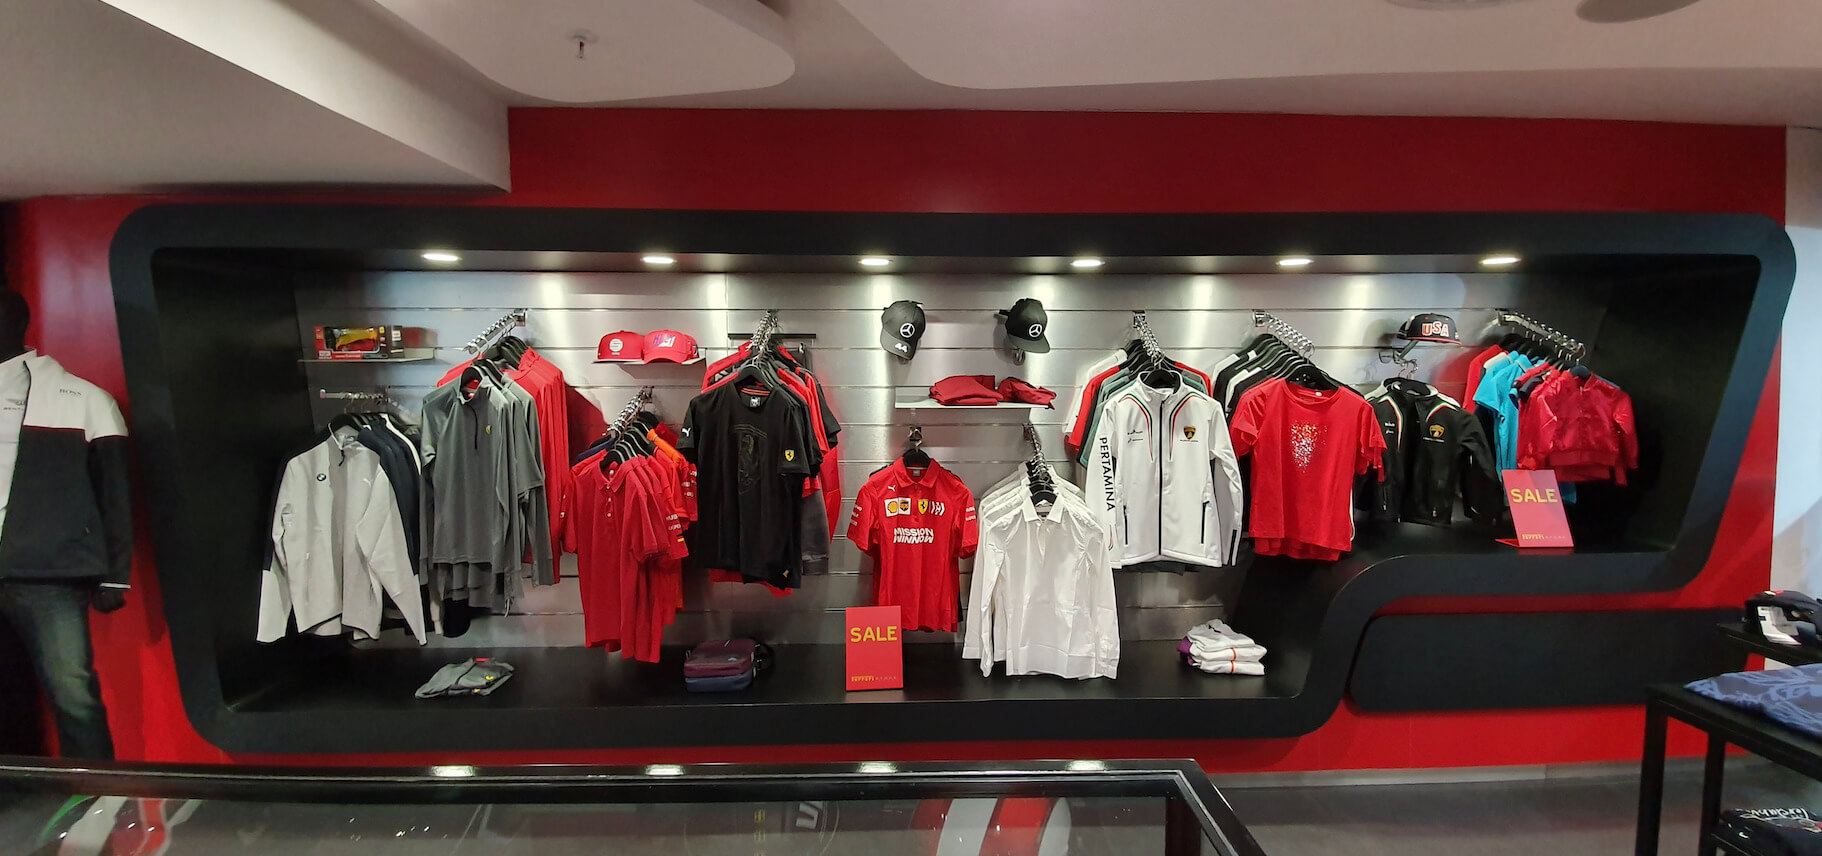 Our Stores - Grand Prix Store